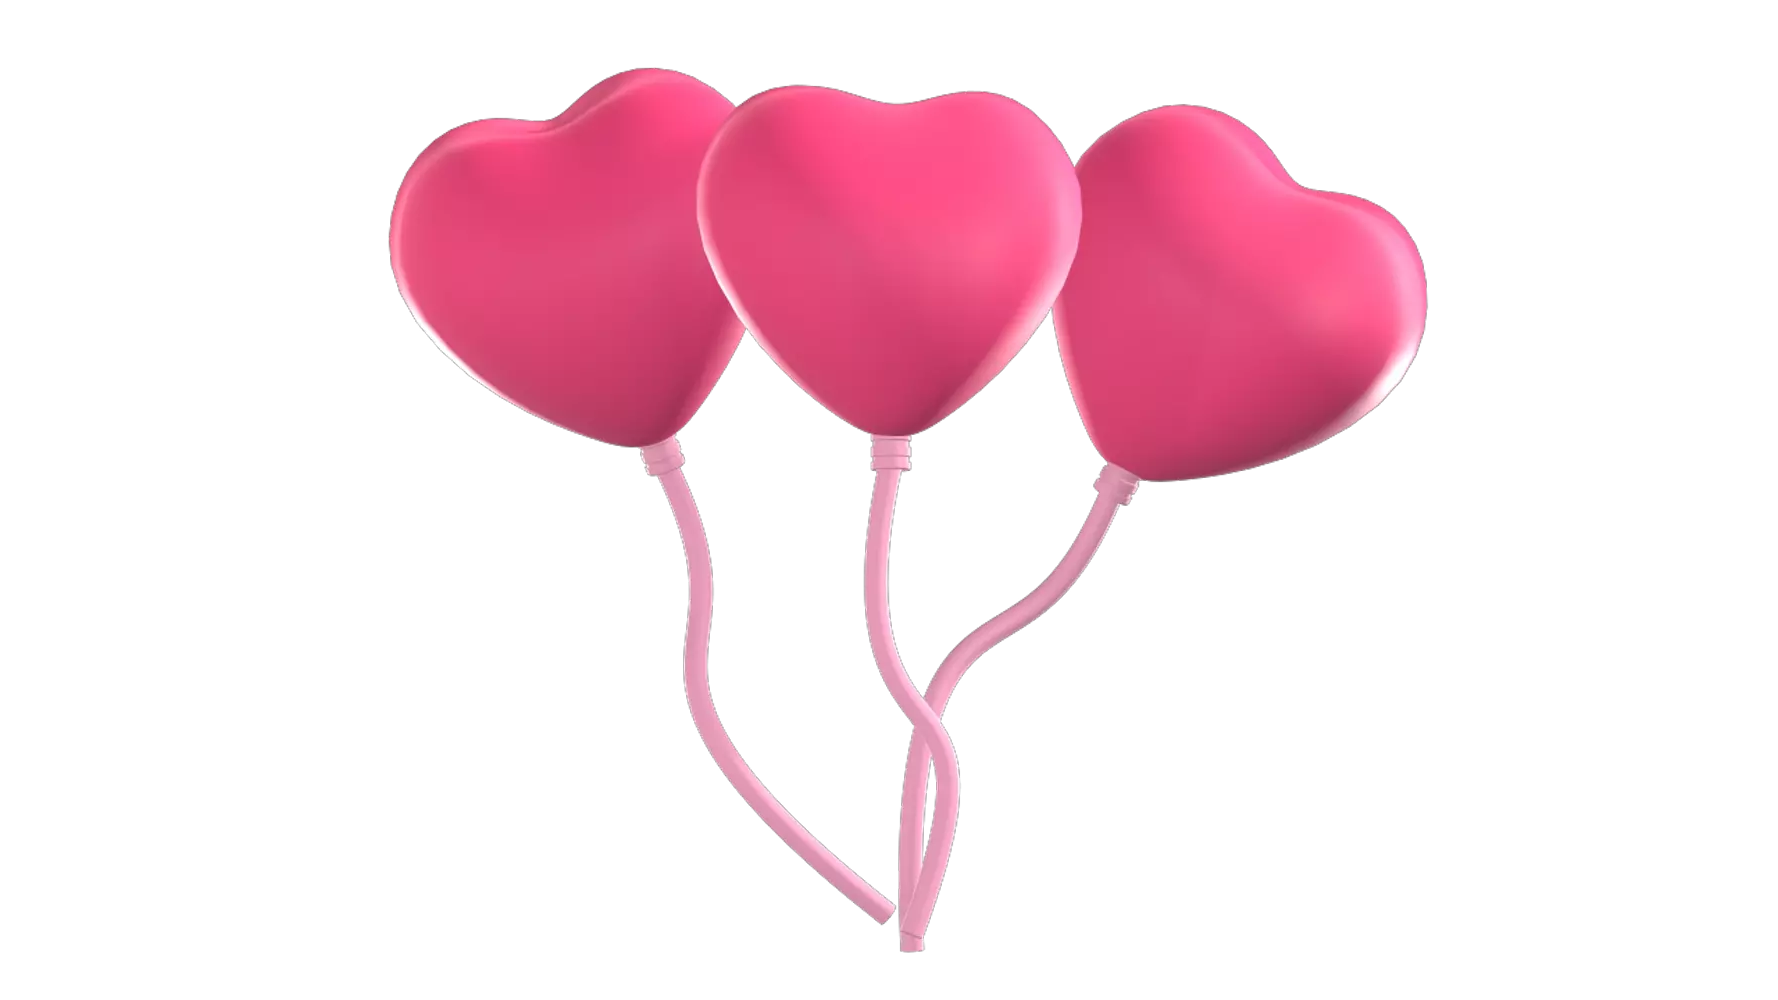 Heart Shaped Balloons 3D Graphic